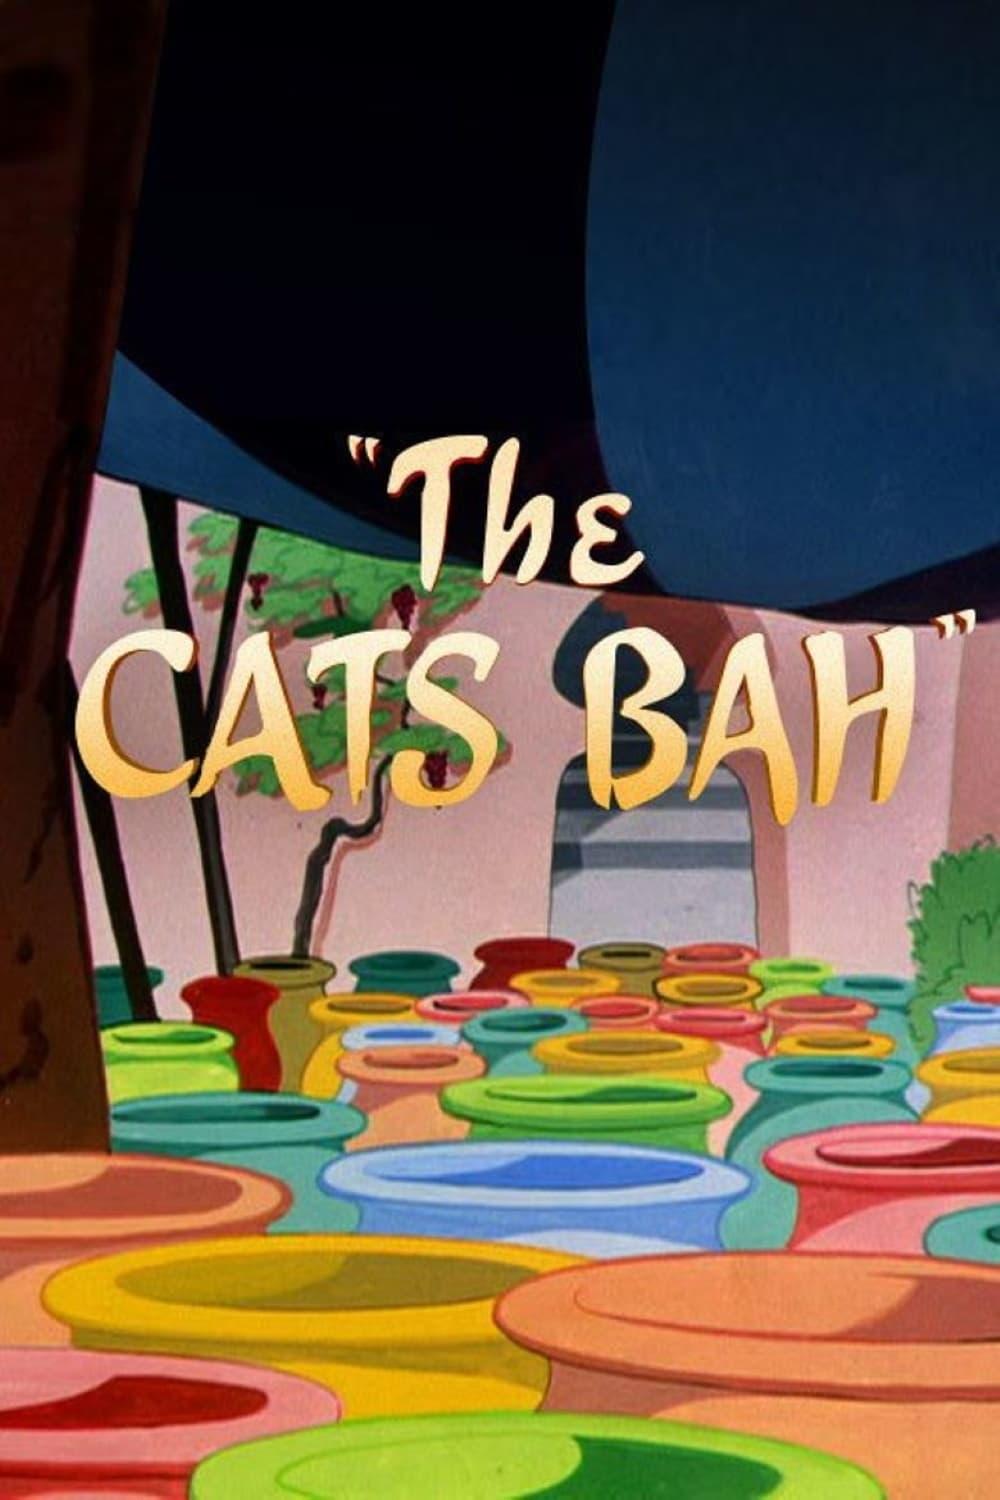 The Cats Bah poster